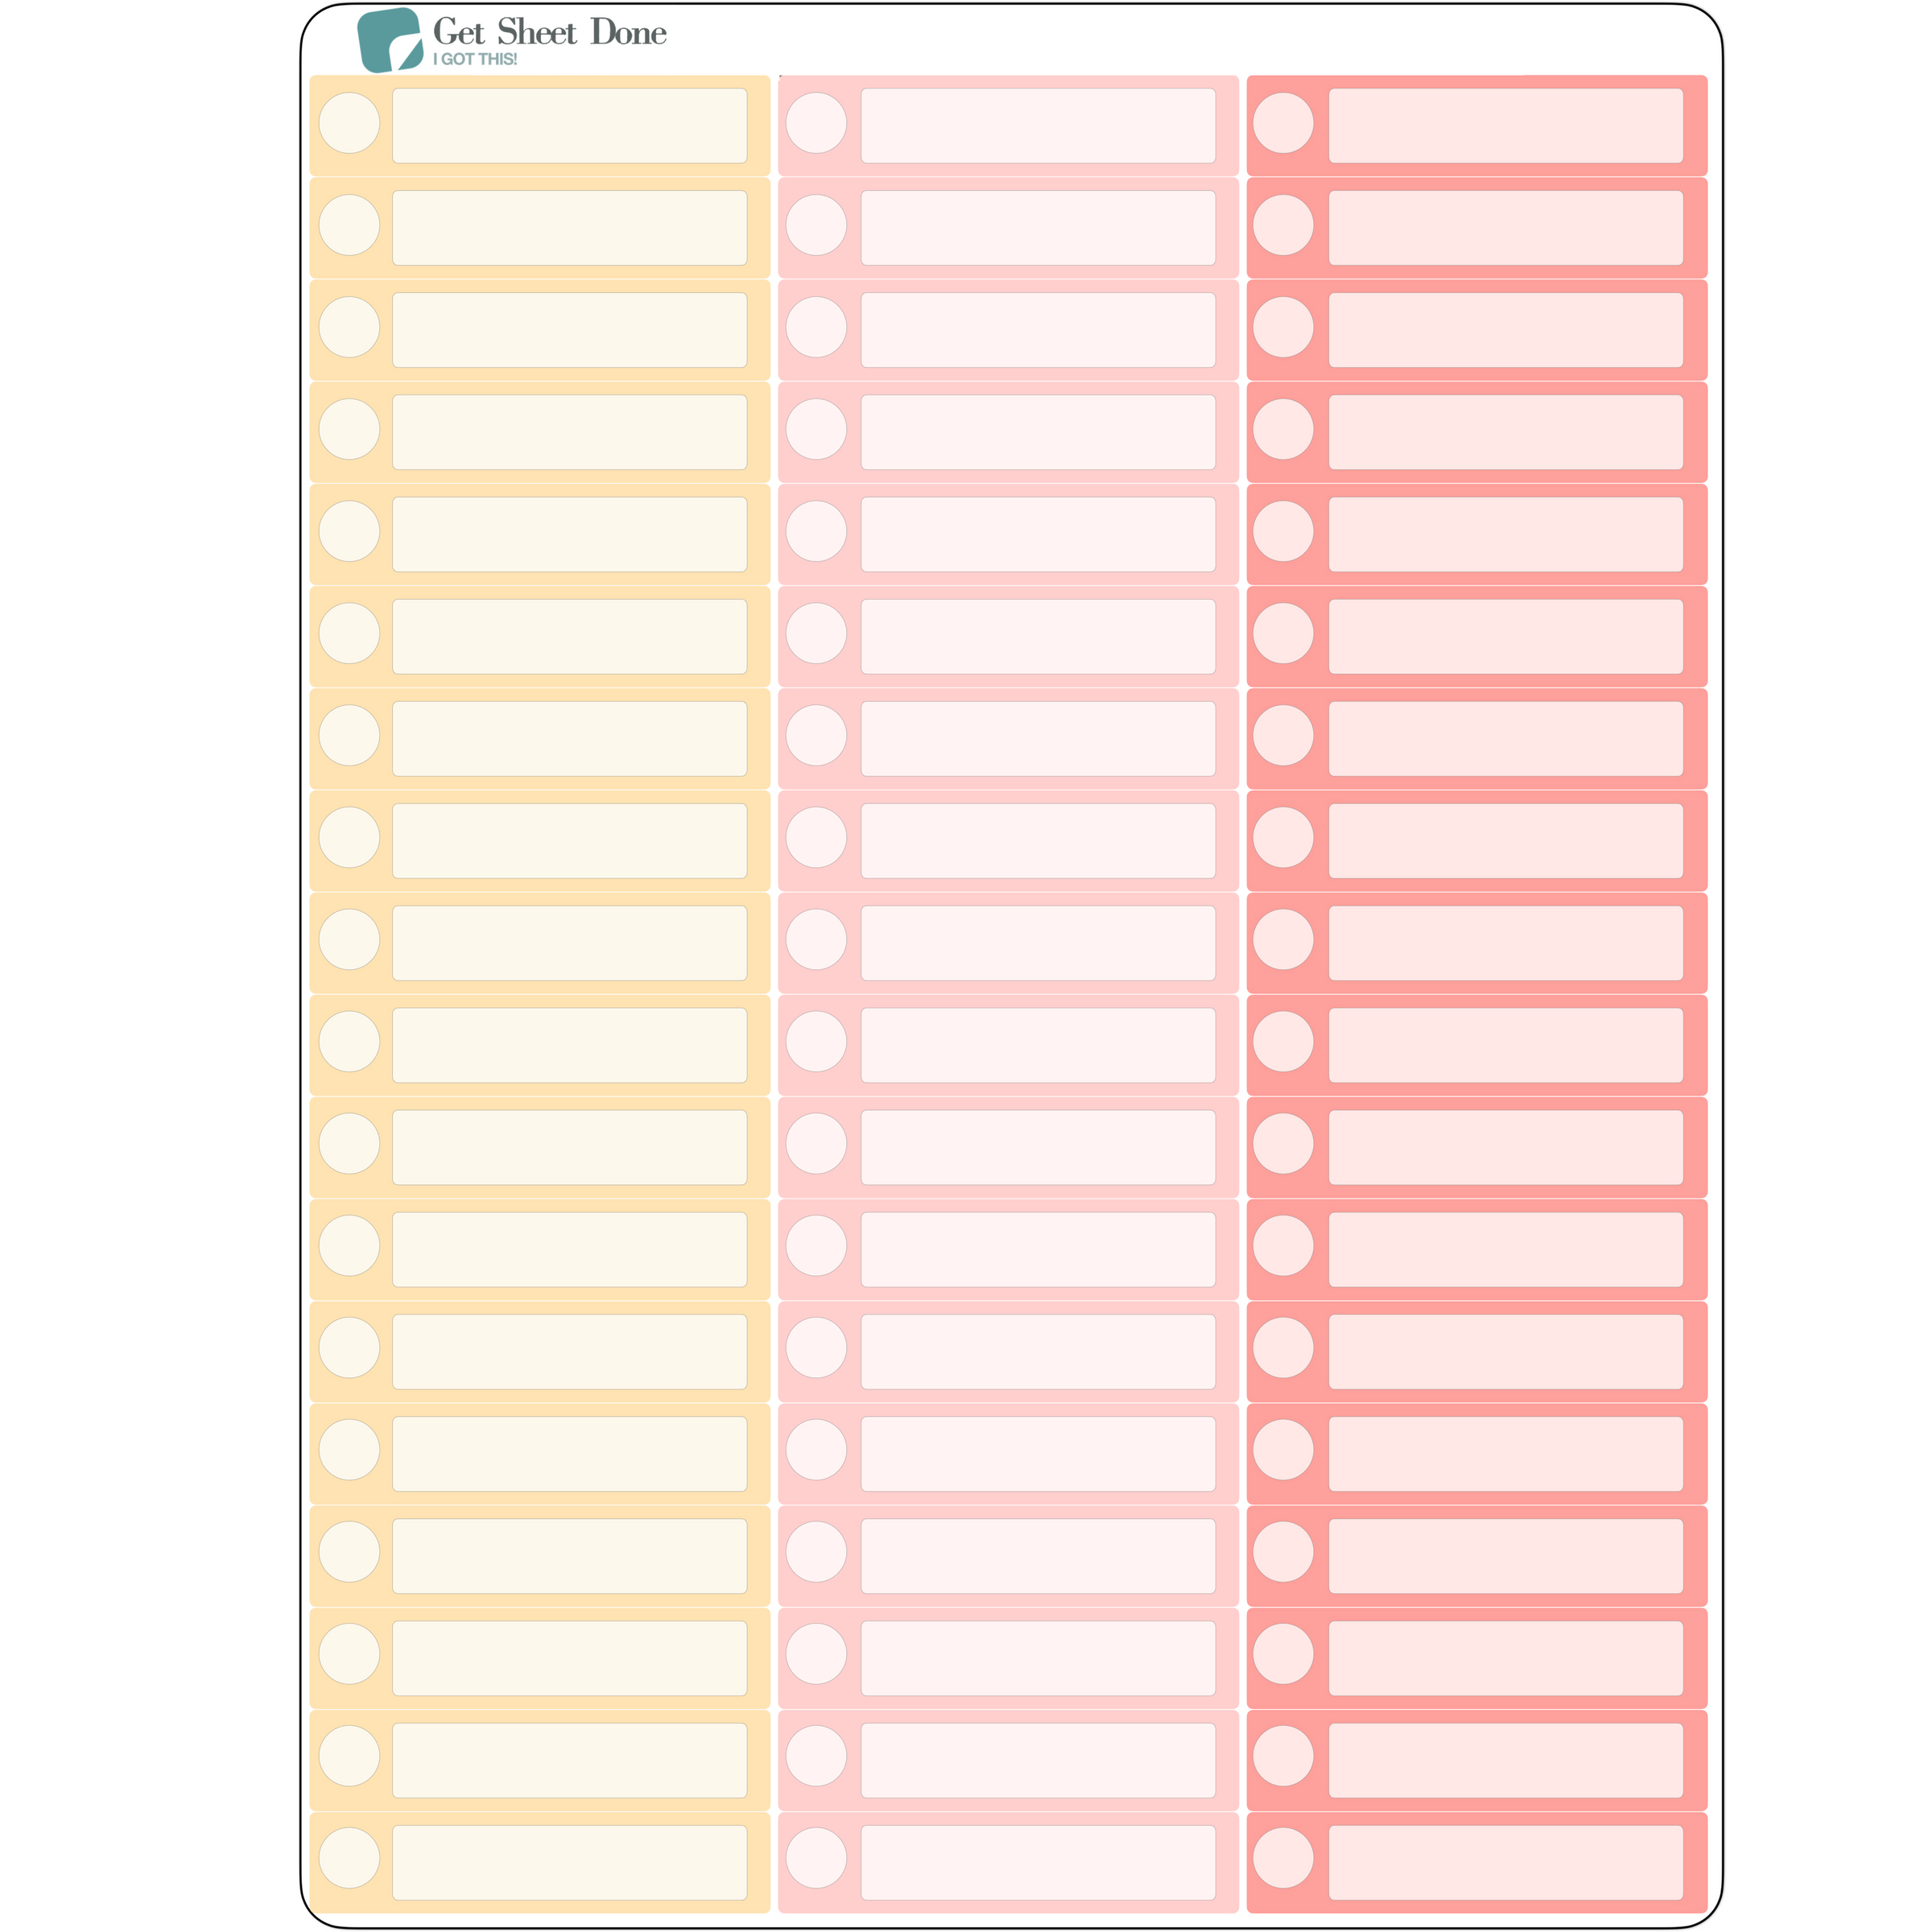 Check List  Functional Box Planner Stickers / Chore Reminder Stickers/ DIY Calendar Stickers / Write In  / Bullet Journaling / Bujo / Essential Productivity Stickers